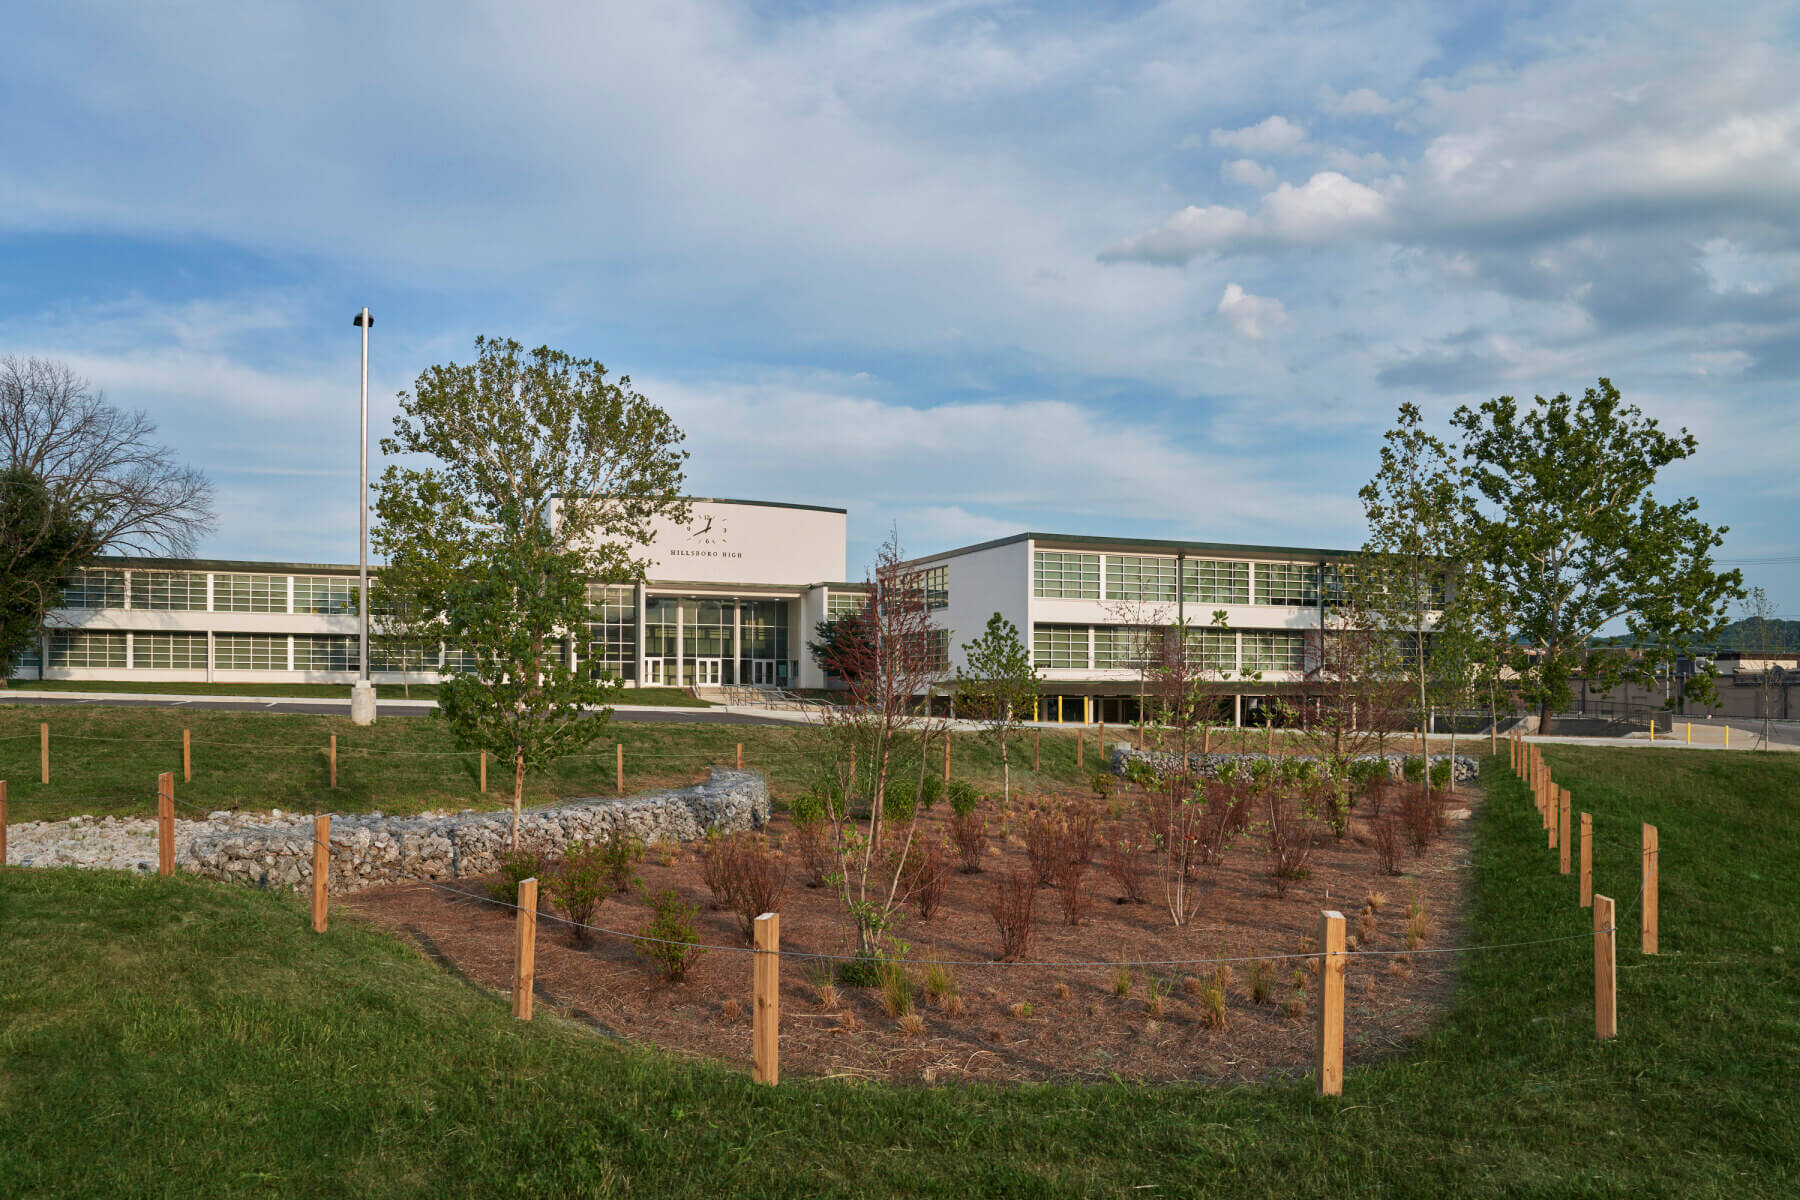 The front of the Hillsboro High School building and surrounding grass and trees